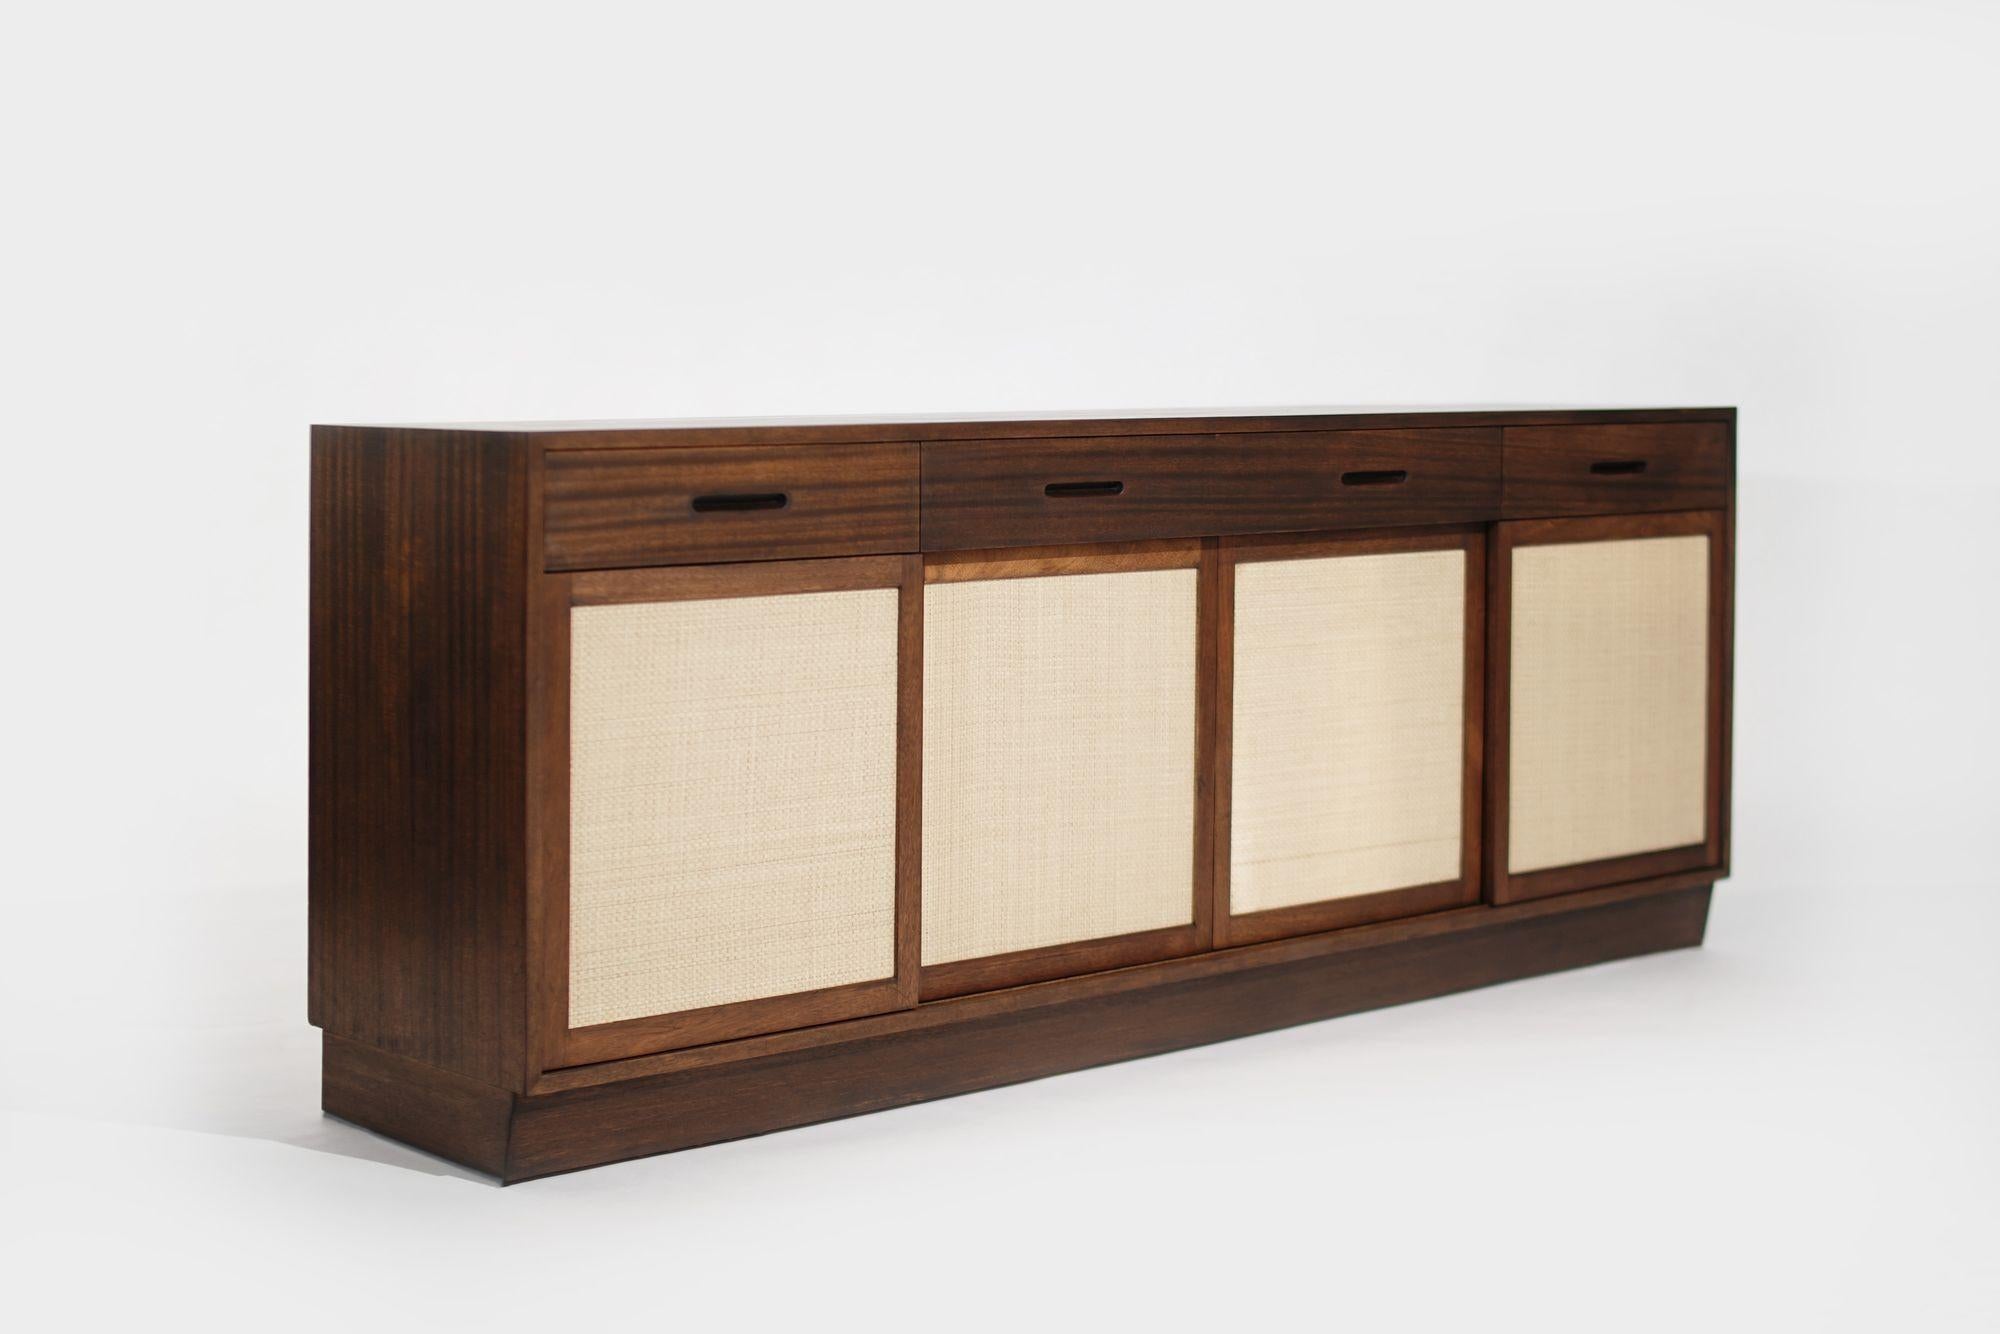 20th Century Edward Wormley for Dunbar Credenza Model, 5668A, C. 1950s For Sale